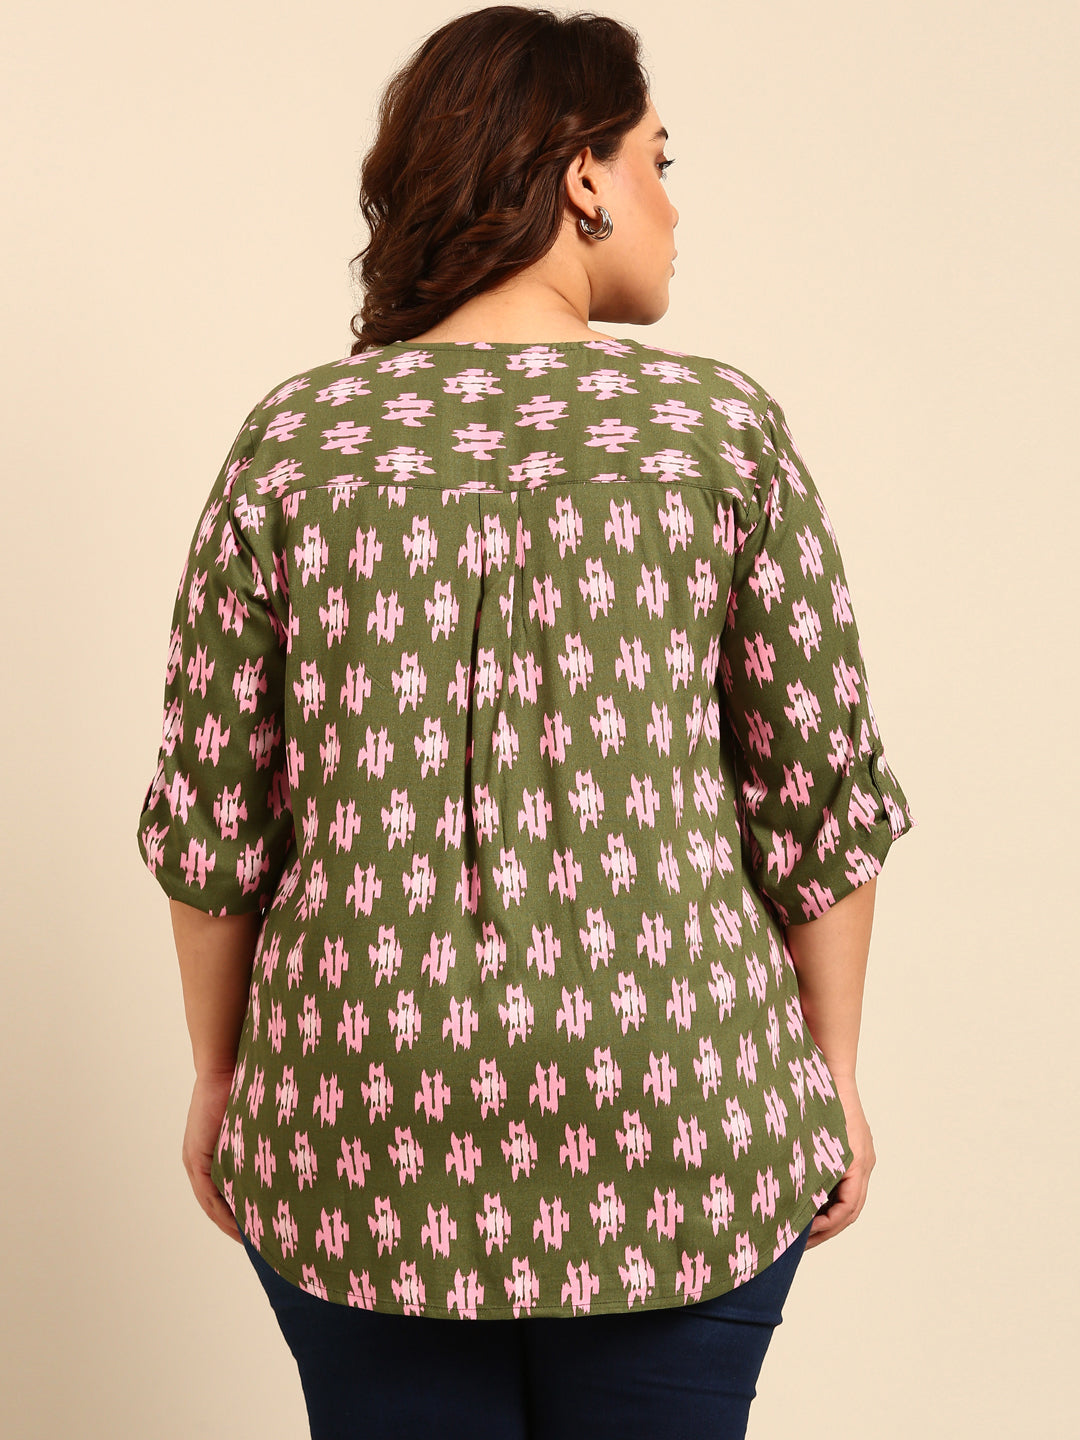 GREEN WITH PINK IKKAT PRINT TOP